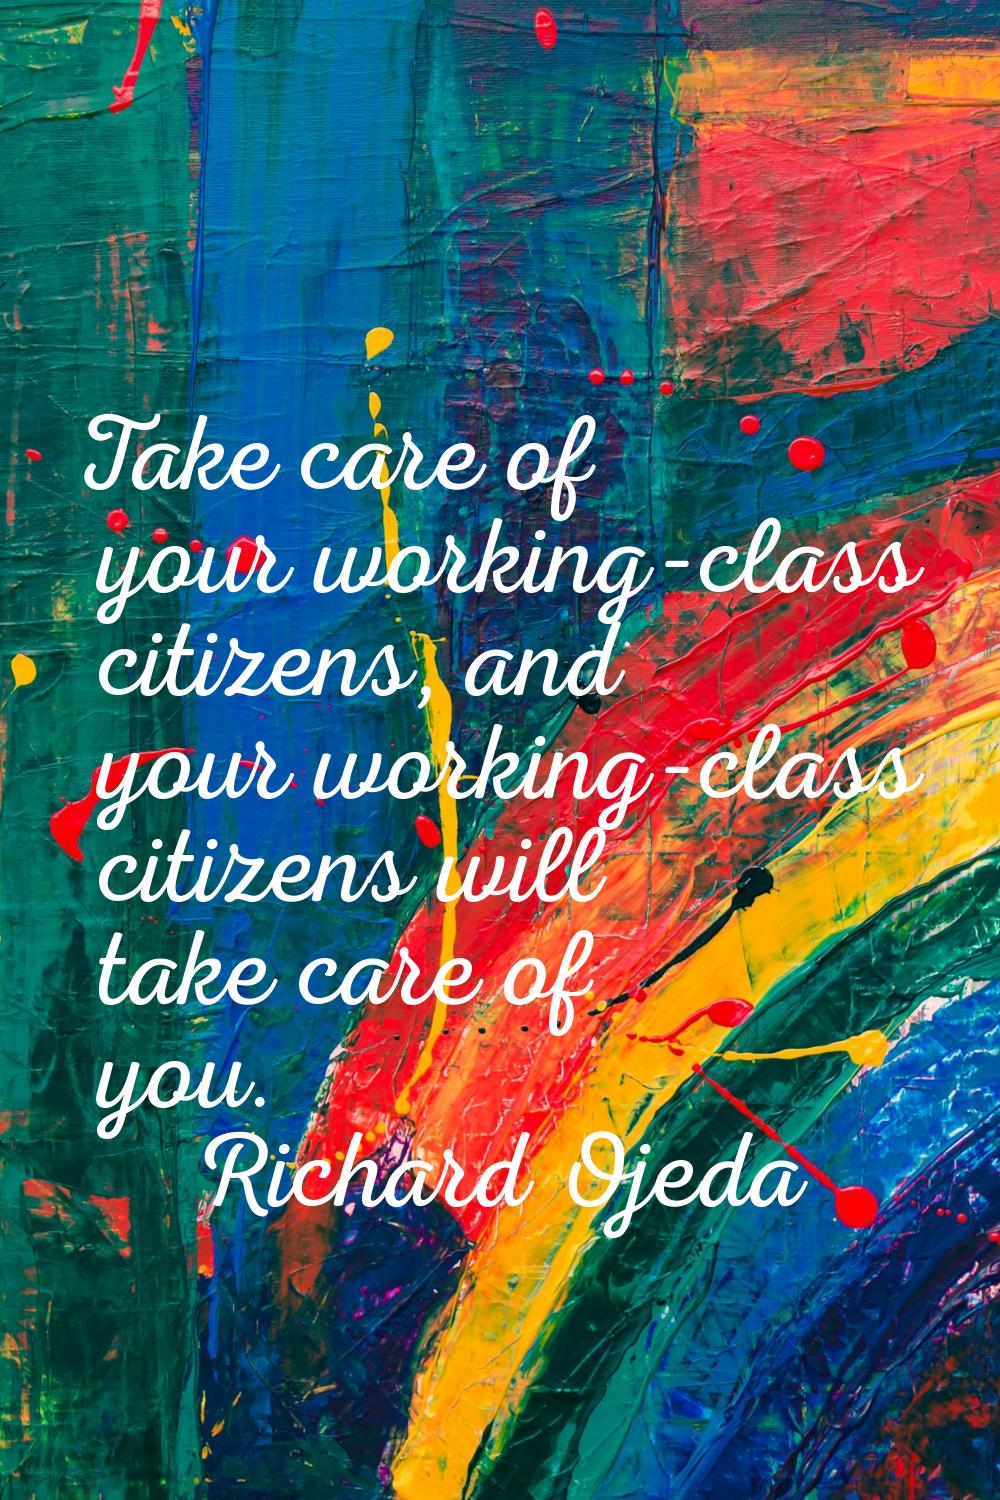 Take care of your working-class citizens, and your working-class citizens will take care of you.